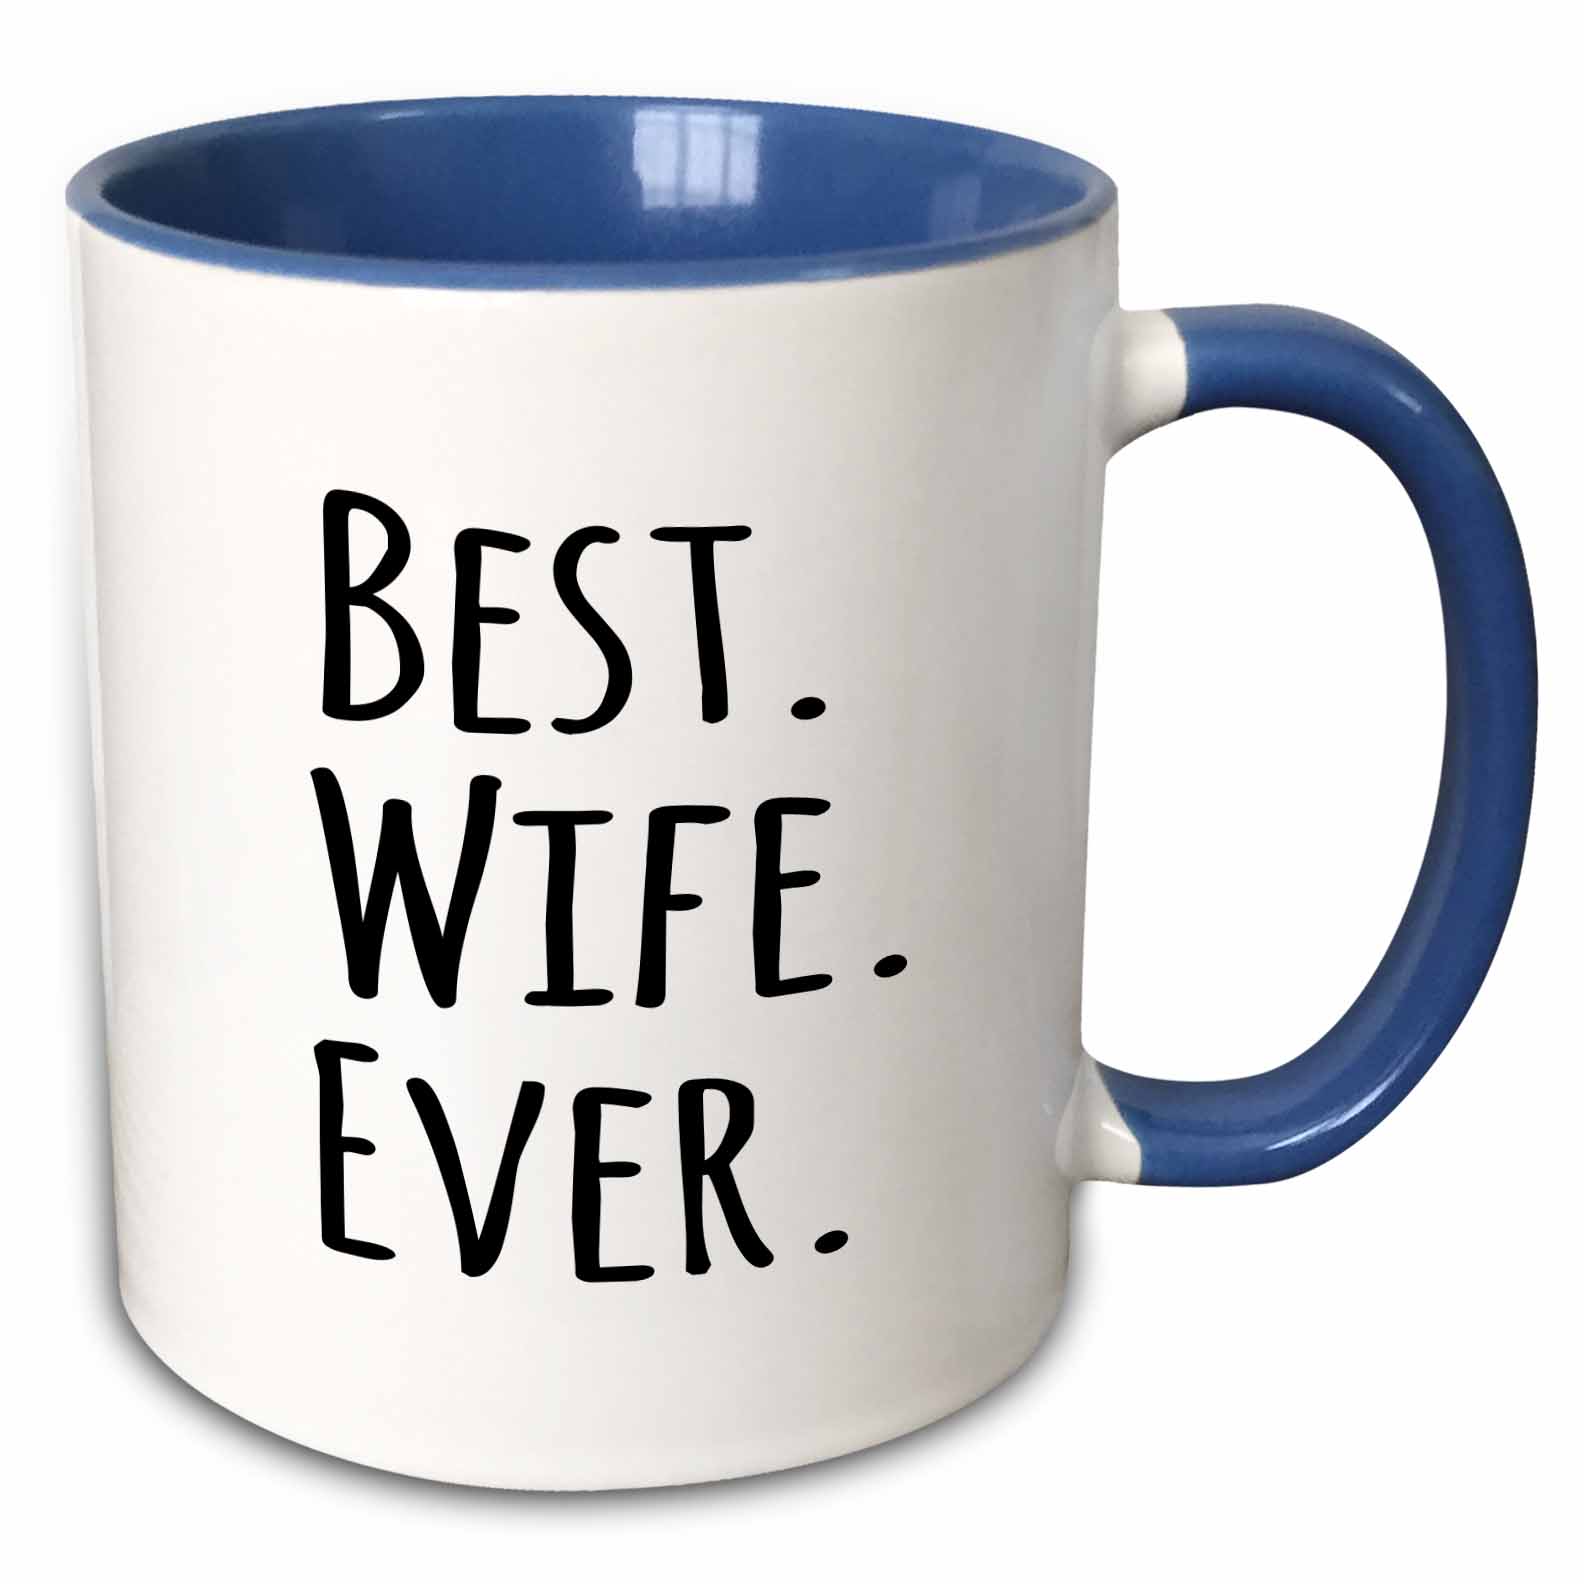 Best Wife Ever - fun romantic married wedded love gifts for her for anniversary or Valentines day 15oz Two-Tone Blue Mug mug-151521-11 - image 1 of 3